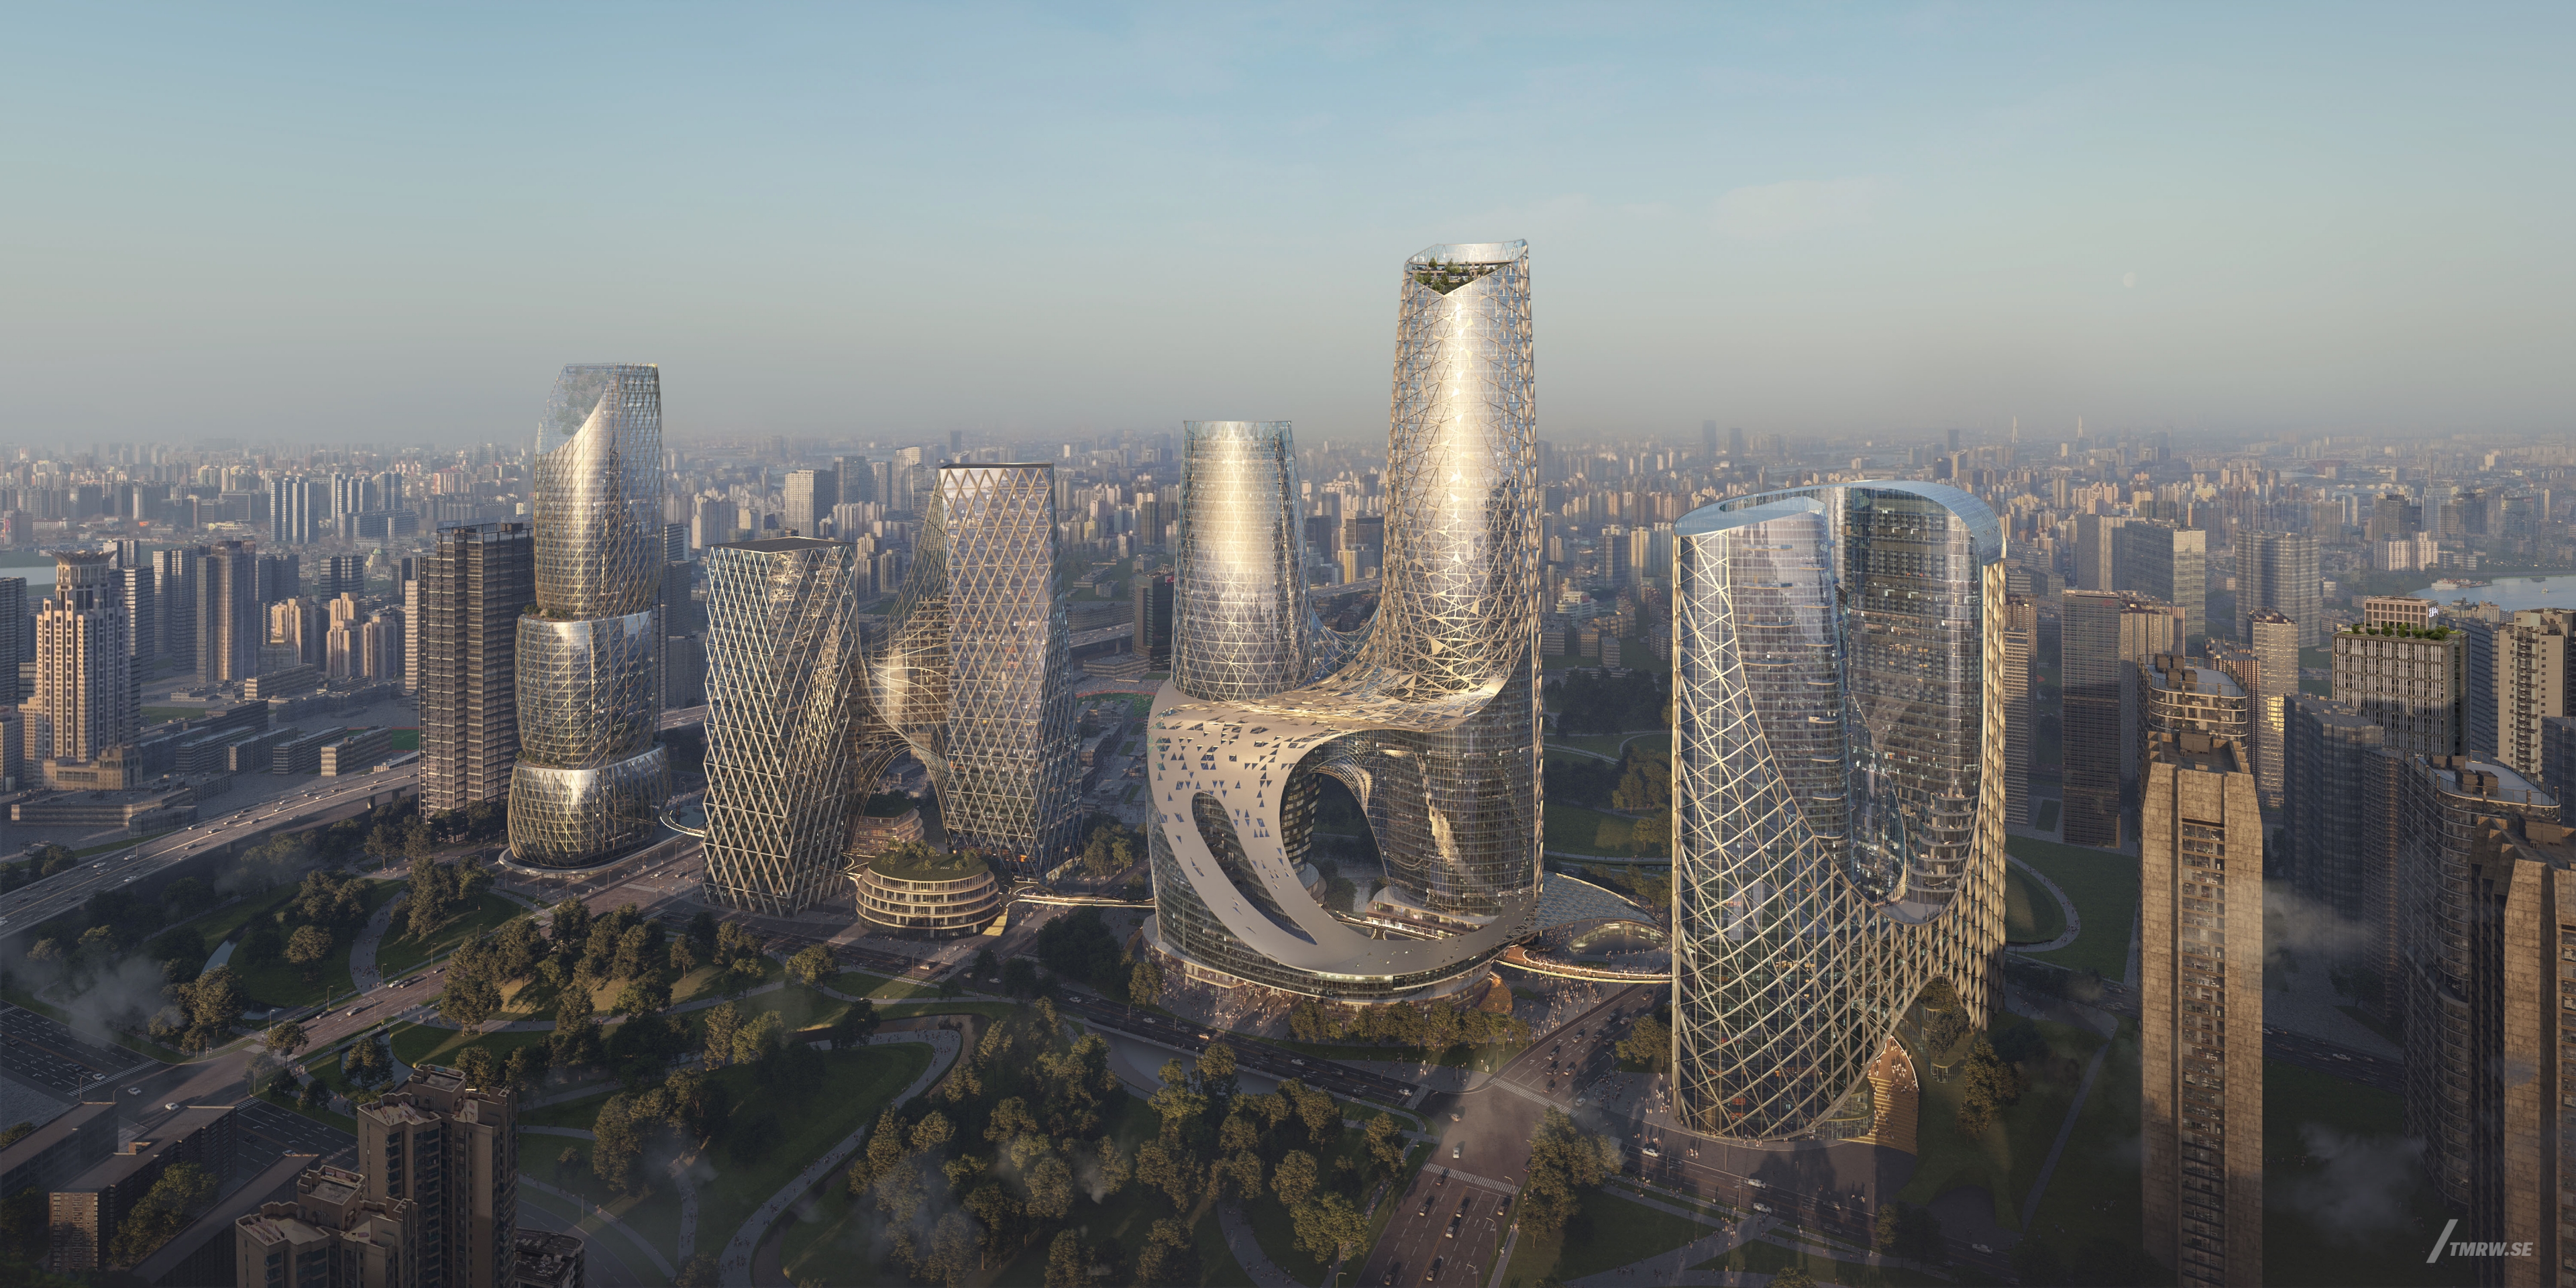 Architectural visualization of Wuhan for NBBJ. An image of the exterior of four skyscraper buildings with glass facade in daylight from semi aerial view.